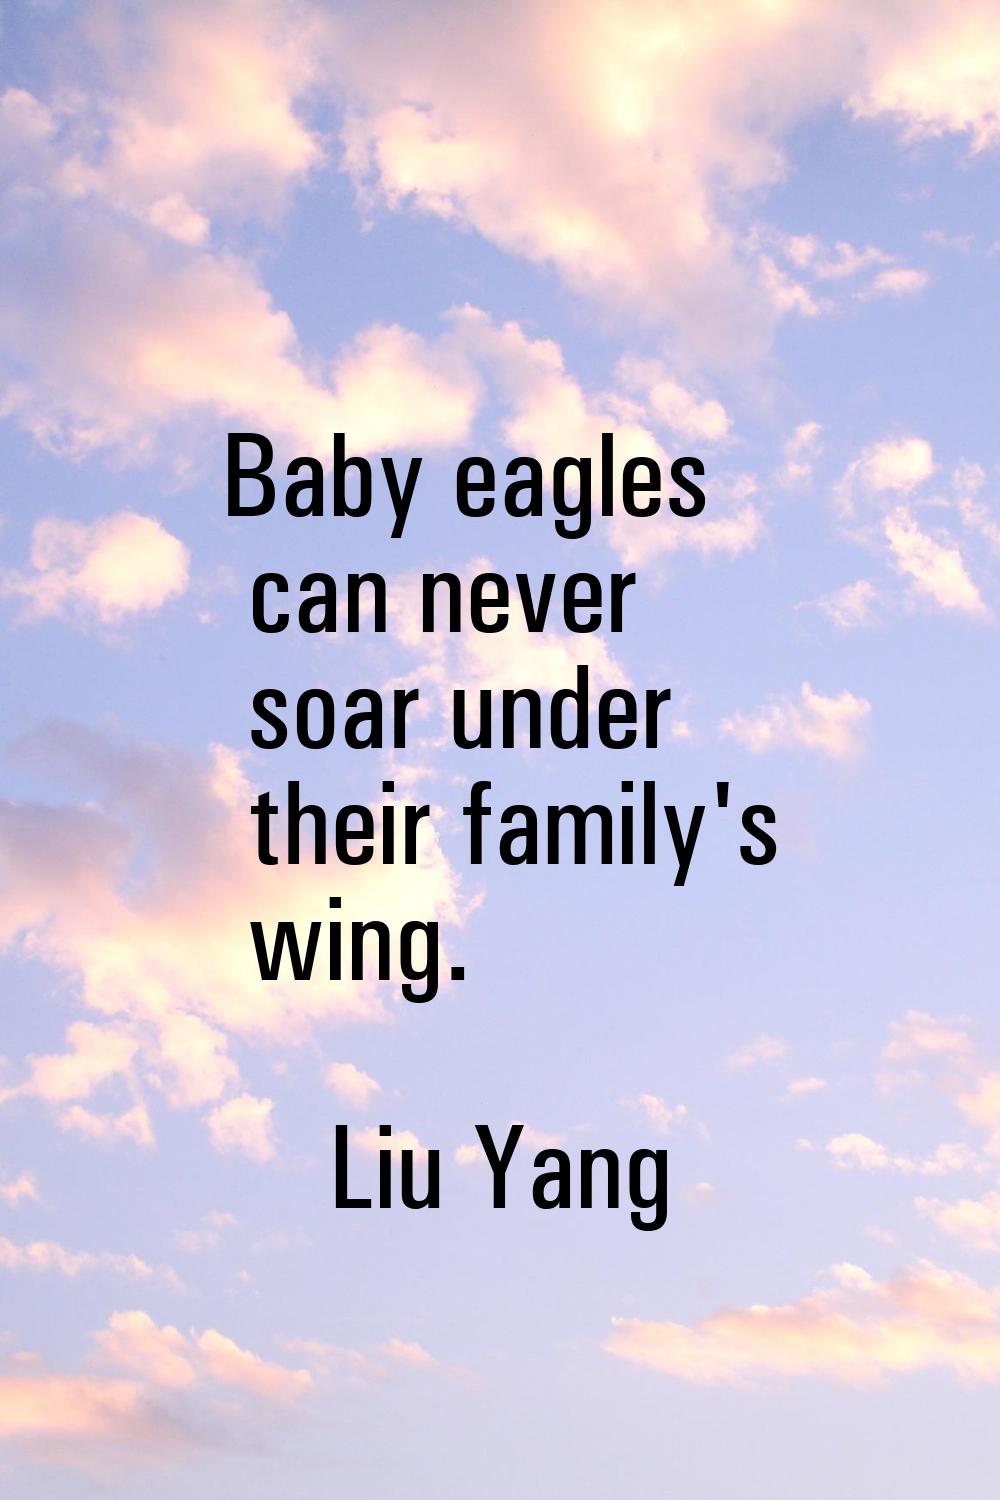 Baby eagles can never soar under their family's wing.